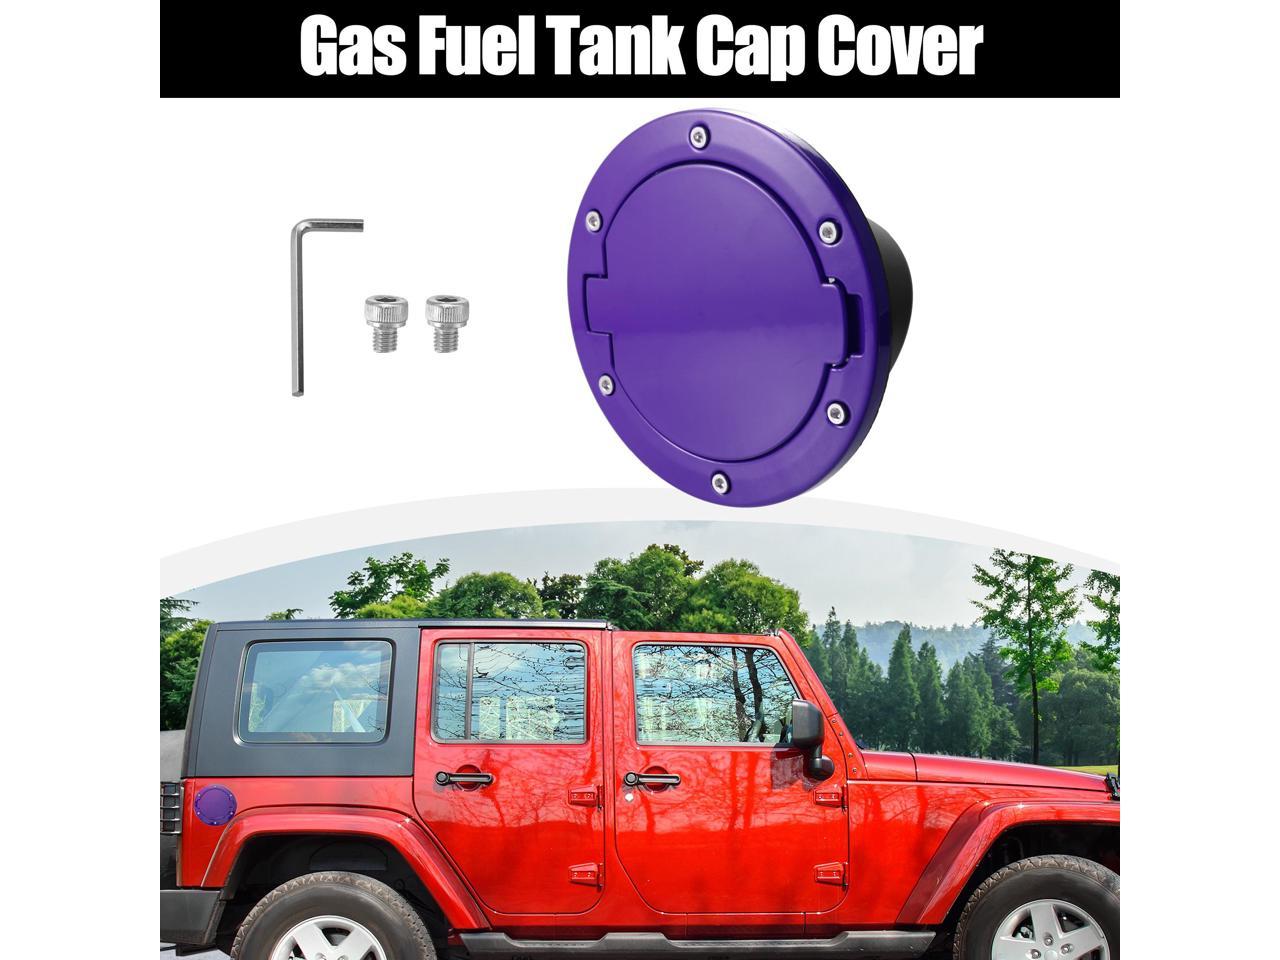 Purple Aluminum Alloy ABS Gas Fuel Tank Cap Cover for Jeep Wrangler  2007-2017 JK 2018 Locking Fuel Filler Cover Accessories 